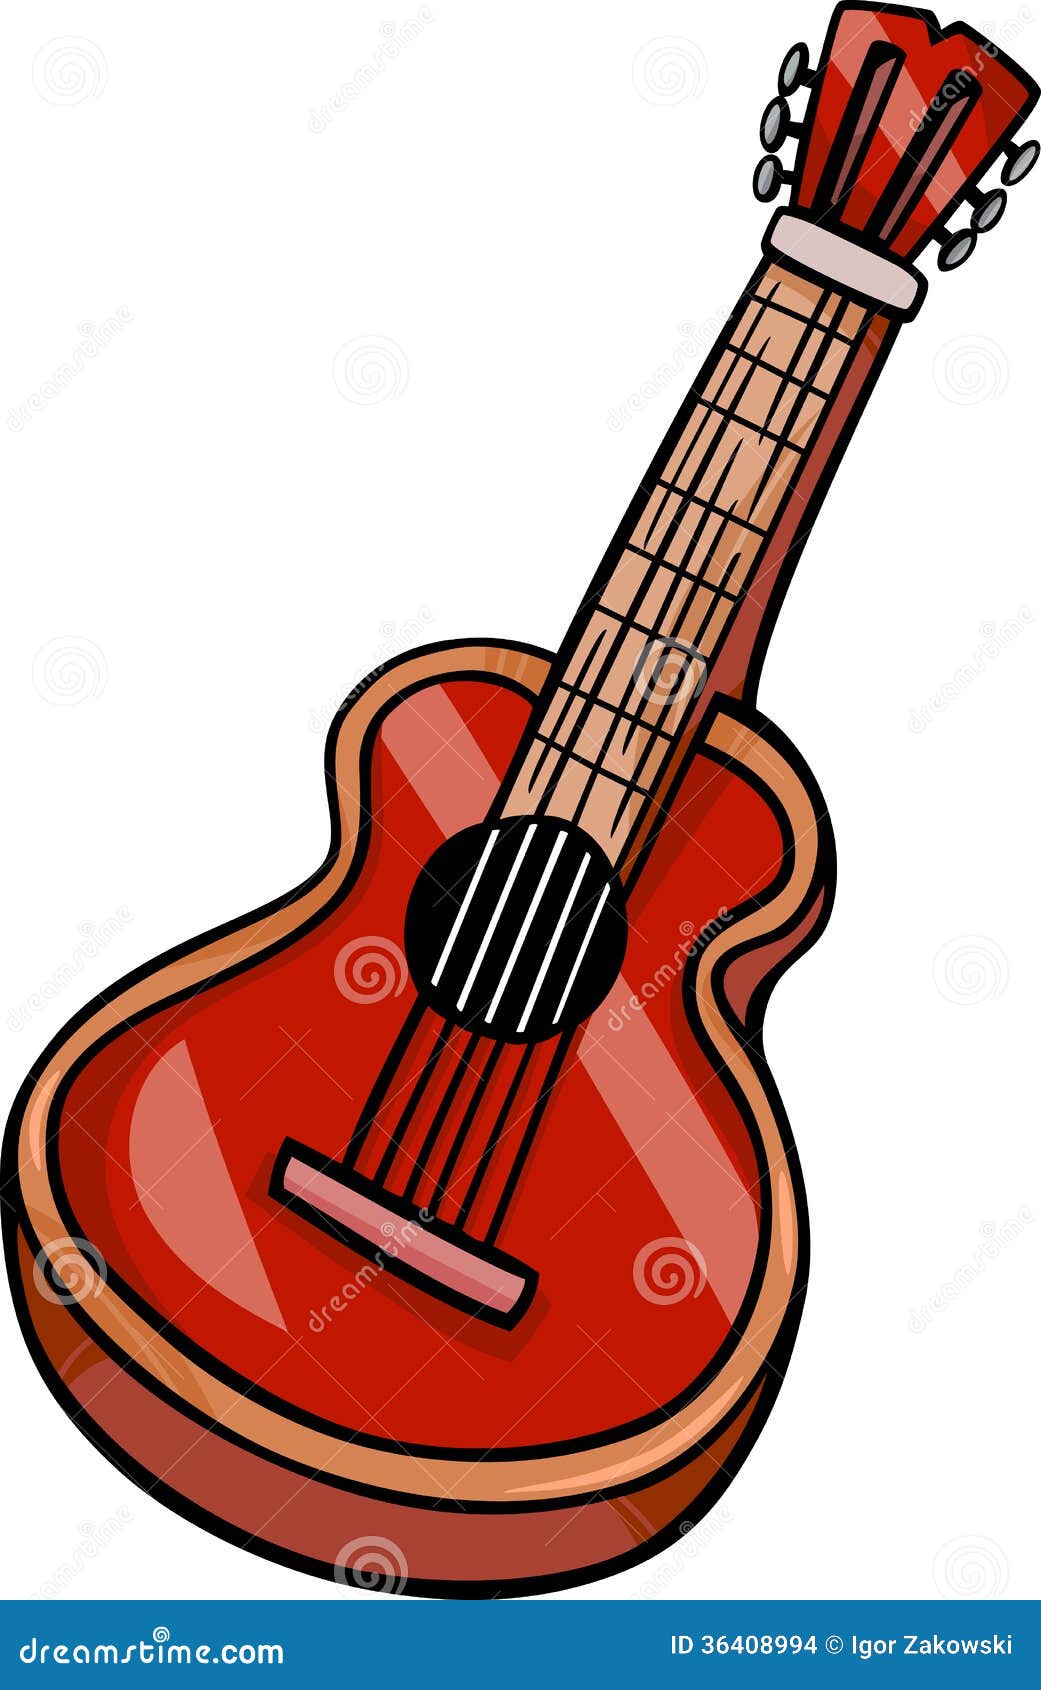 cartoon clipart of musical instruments - photo #9